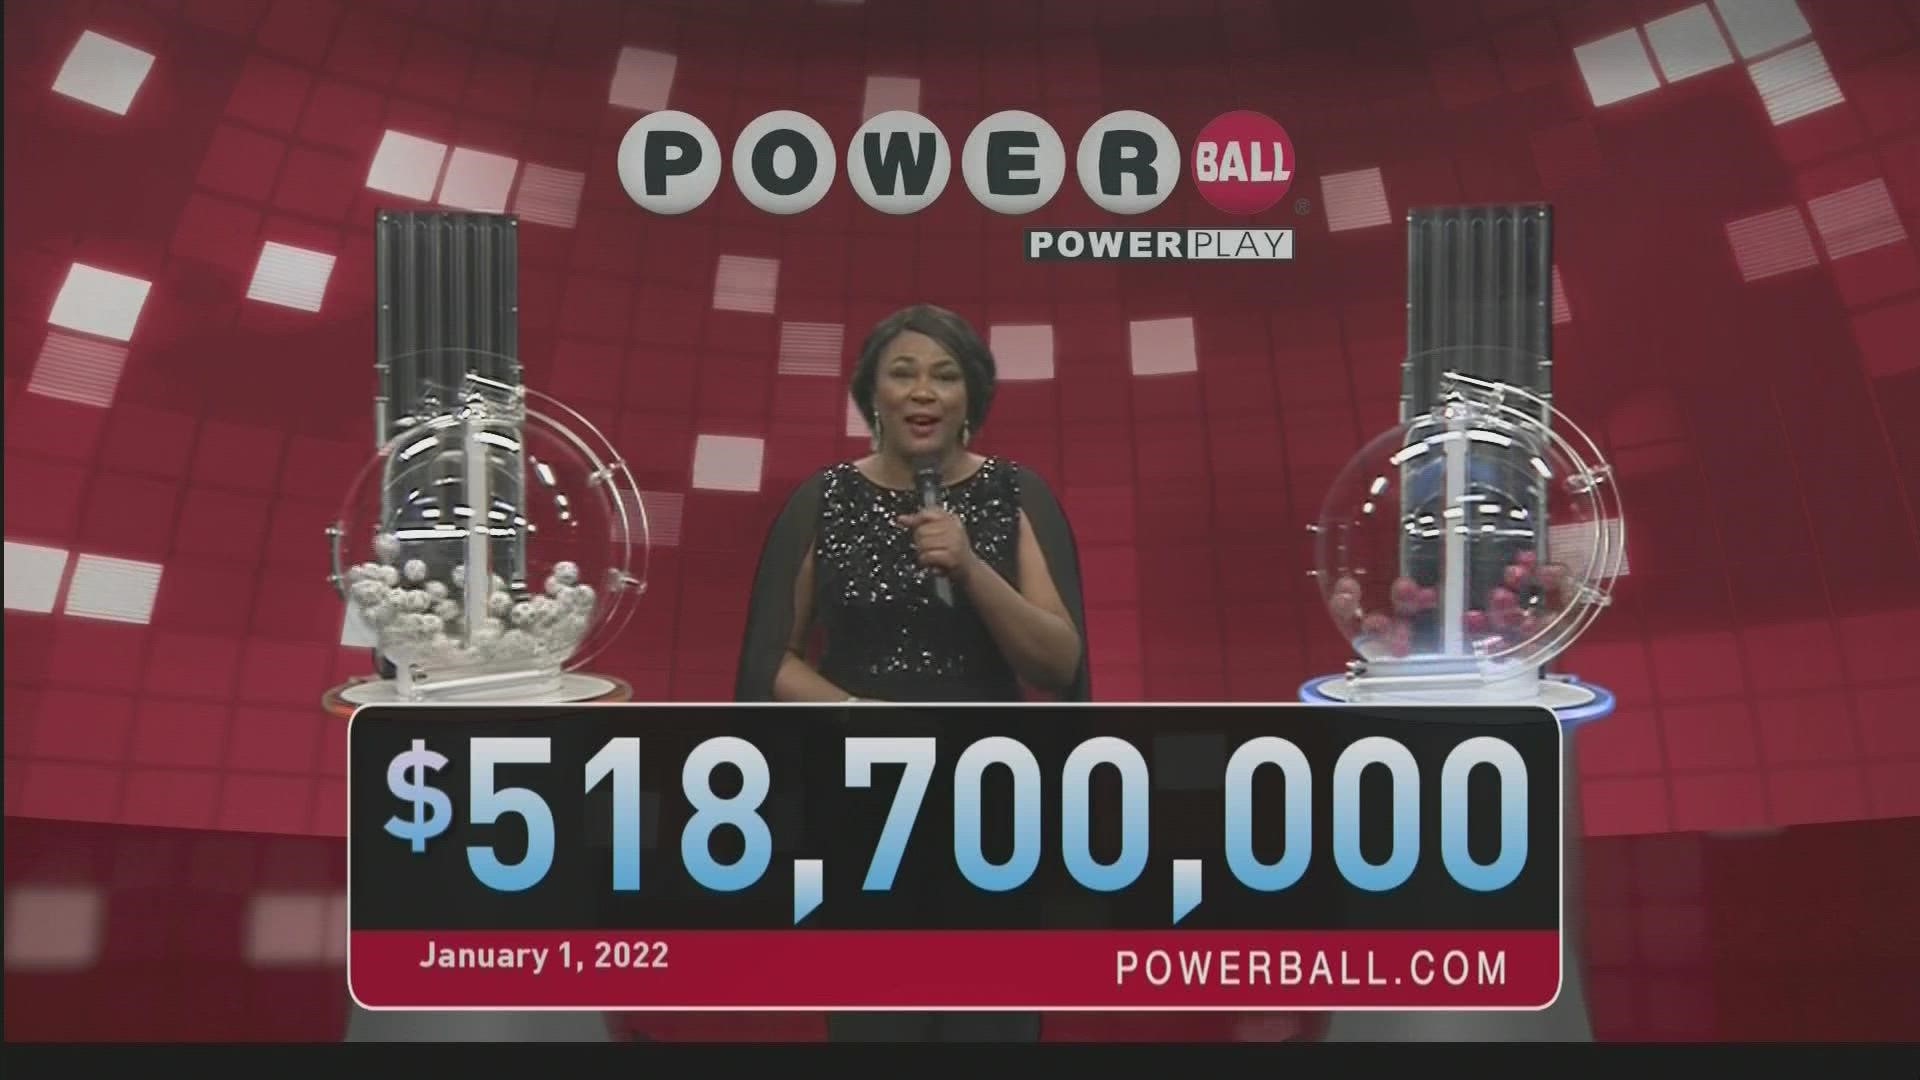 Here were the winning numbers for the $518 million Powerball jackpot for January 1, 2022.